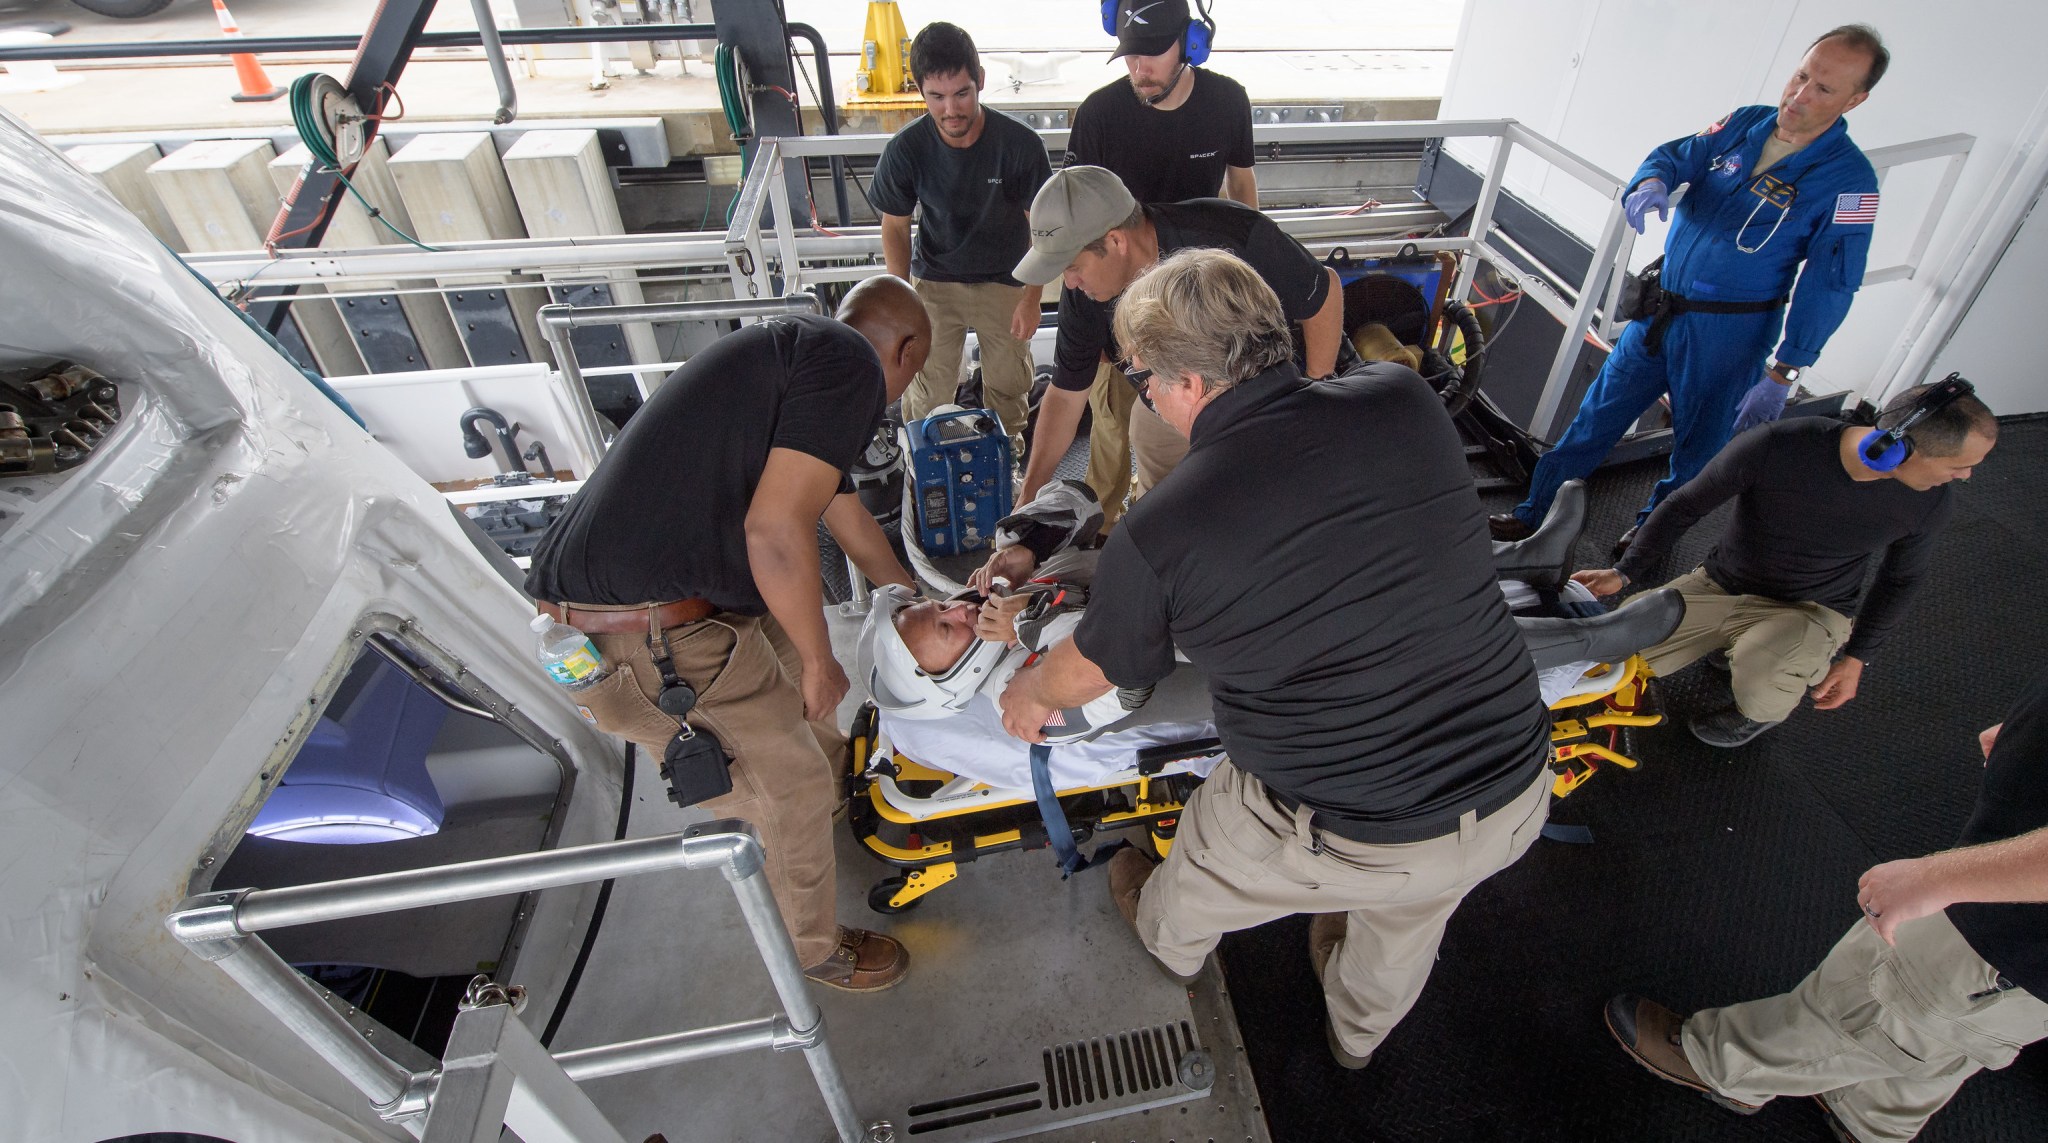 NASA astronaut Doug Hurley, along with teams from NASA and SpaceX, rehearse crew extraction from SpaceX’s Crew Dragon